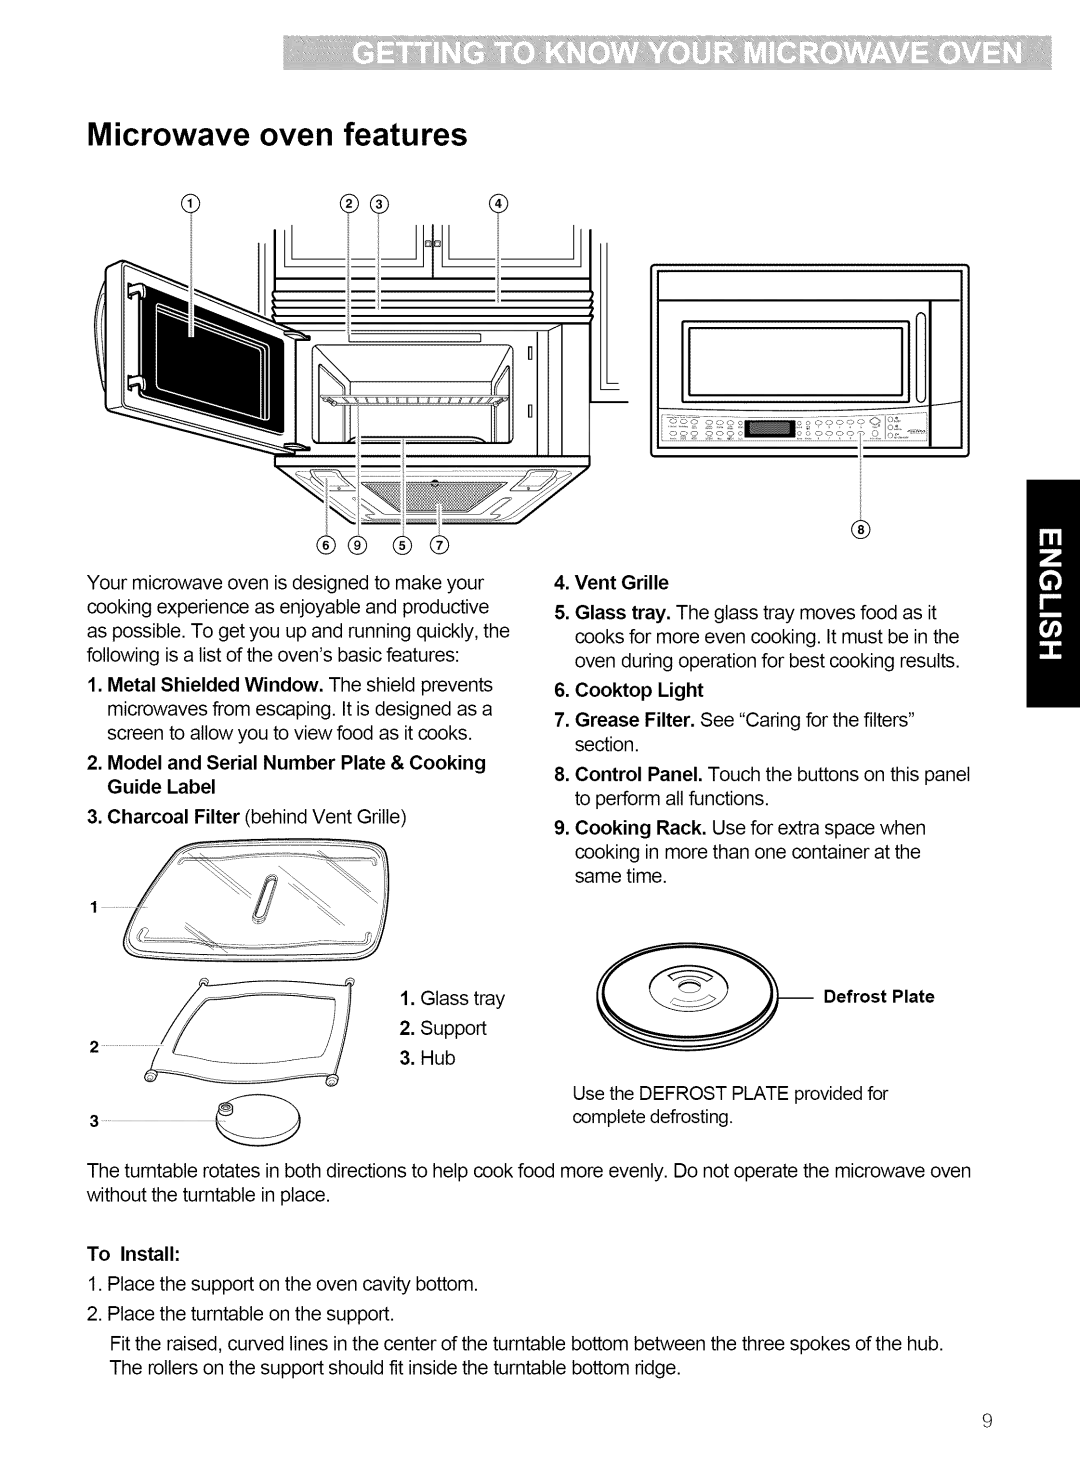 Kenmore 721.80863 manual Microwave oven features, Model and Serial Number Plate & Cooking, Guide Label, Hub, Vent Grille 